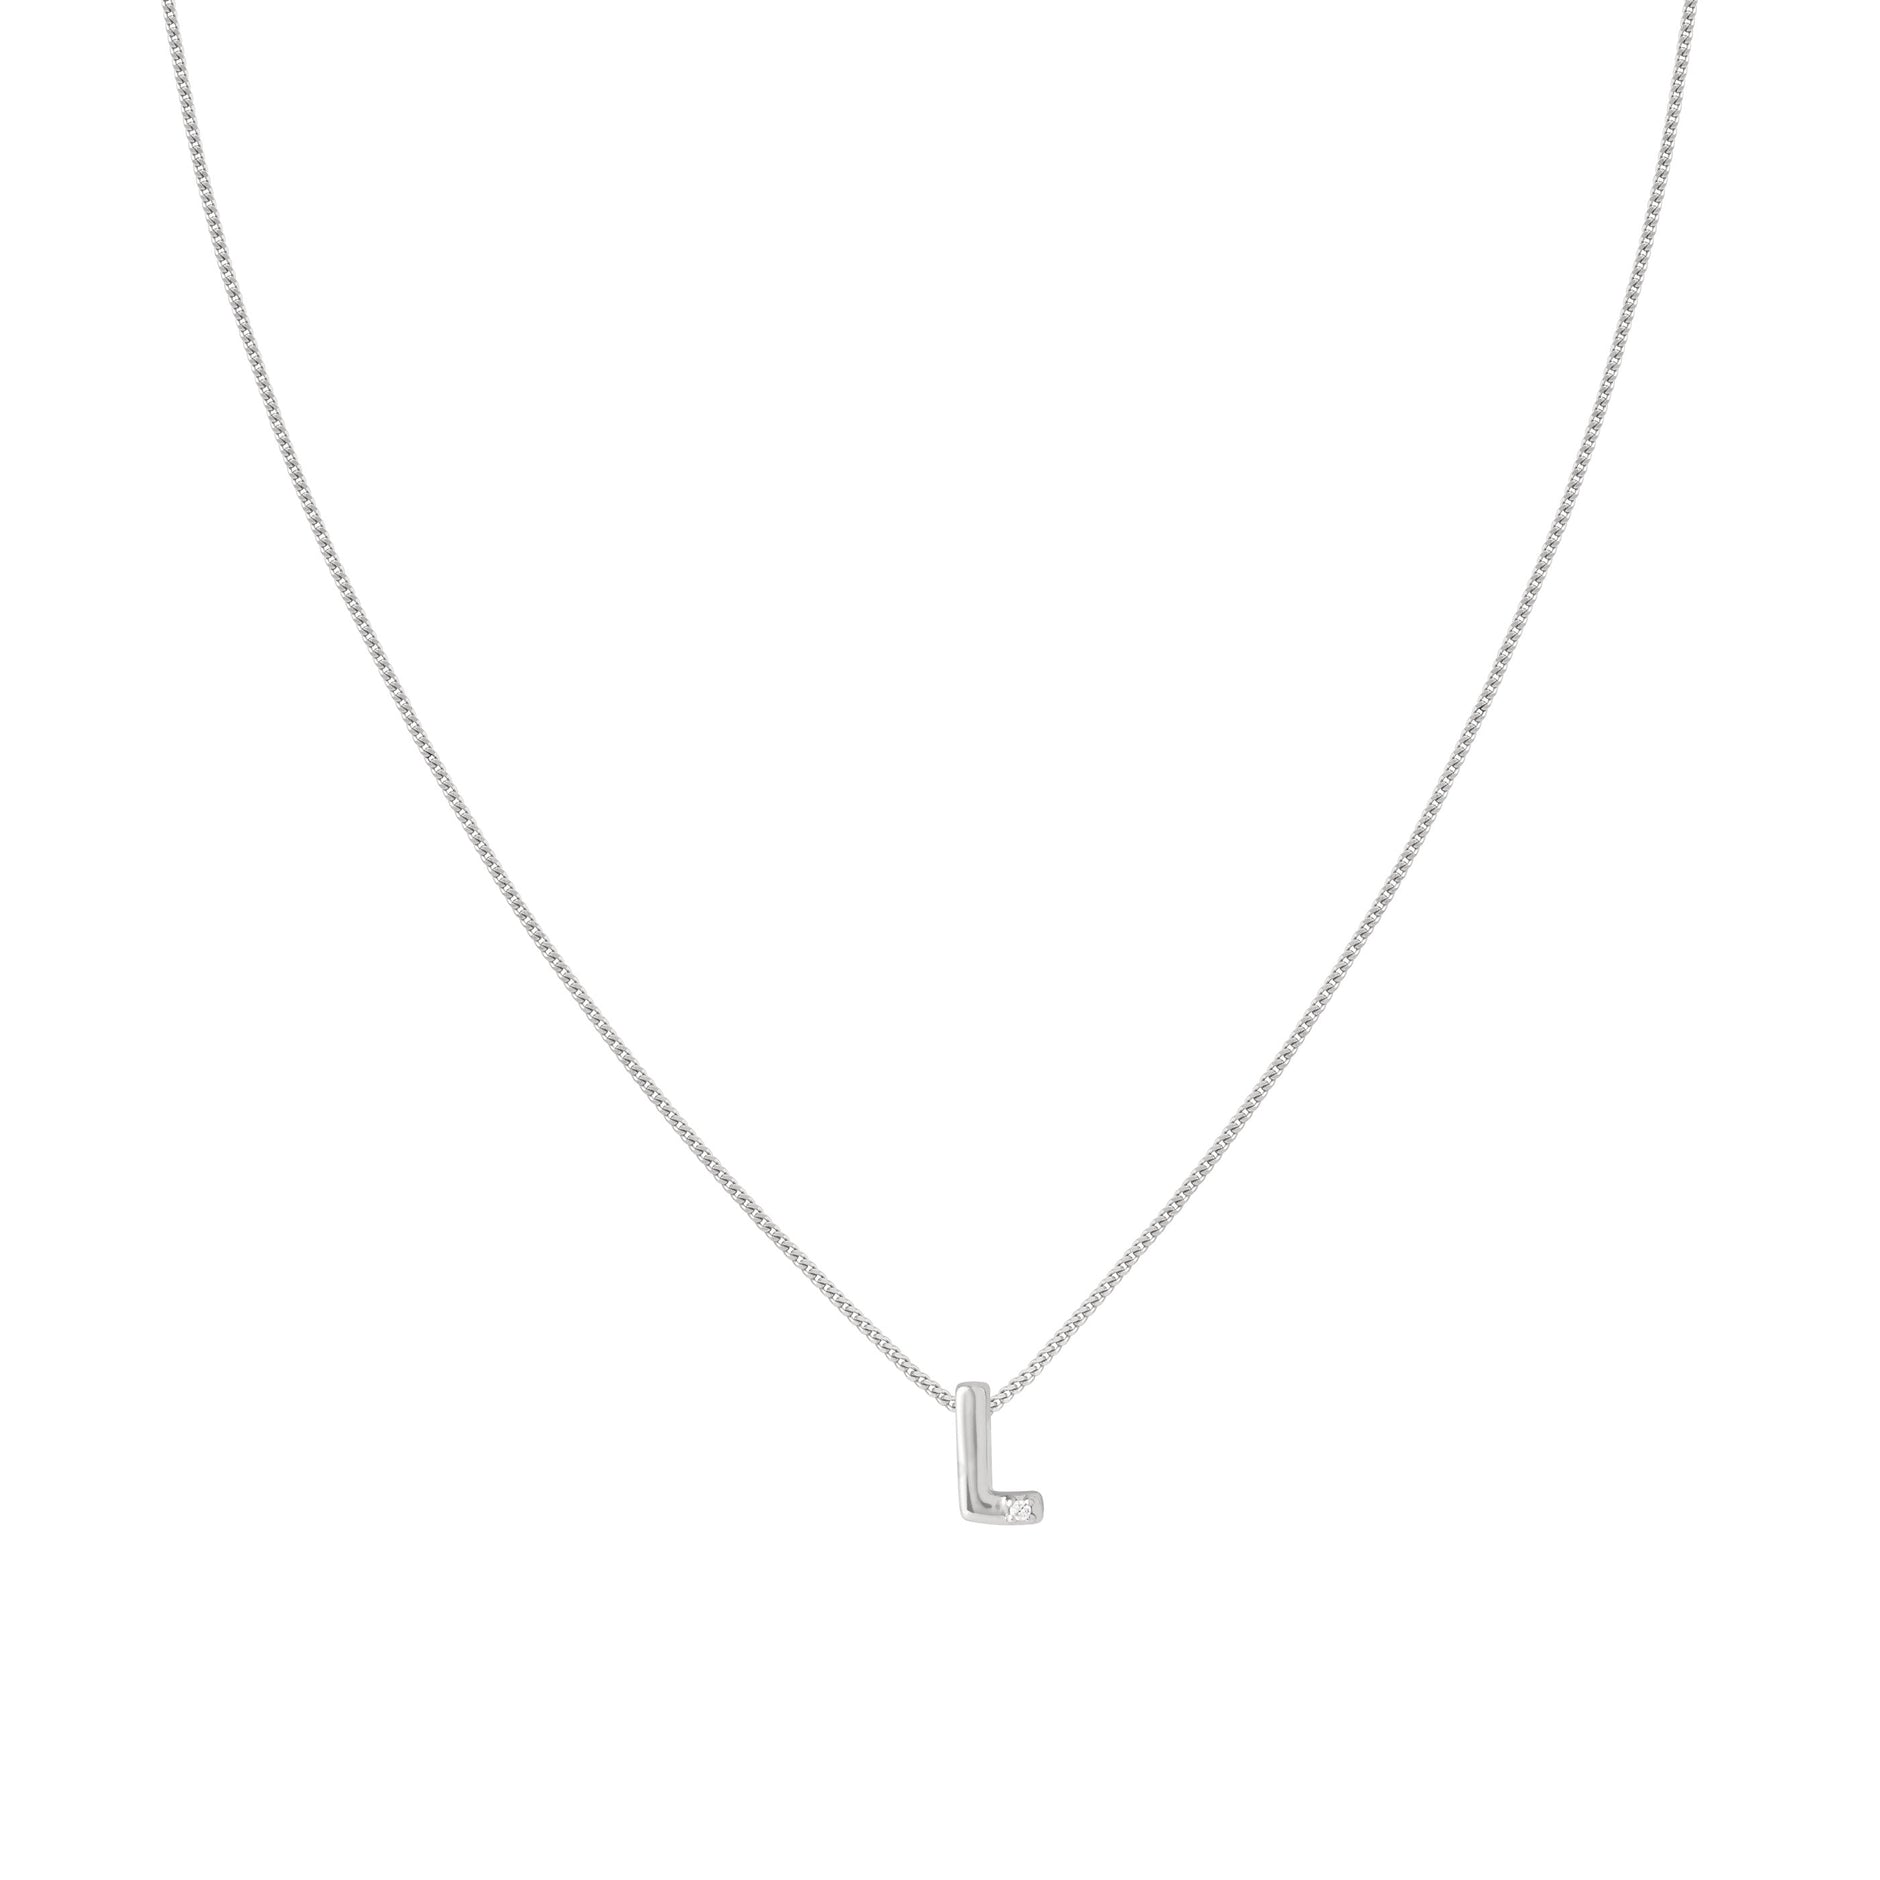 L Initial Pendant Necklace in Silver